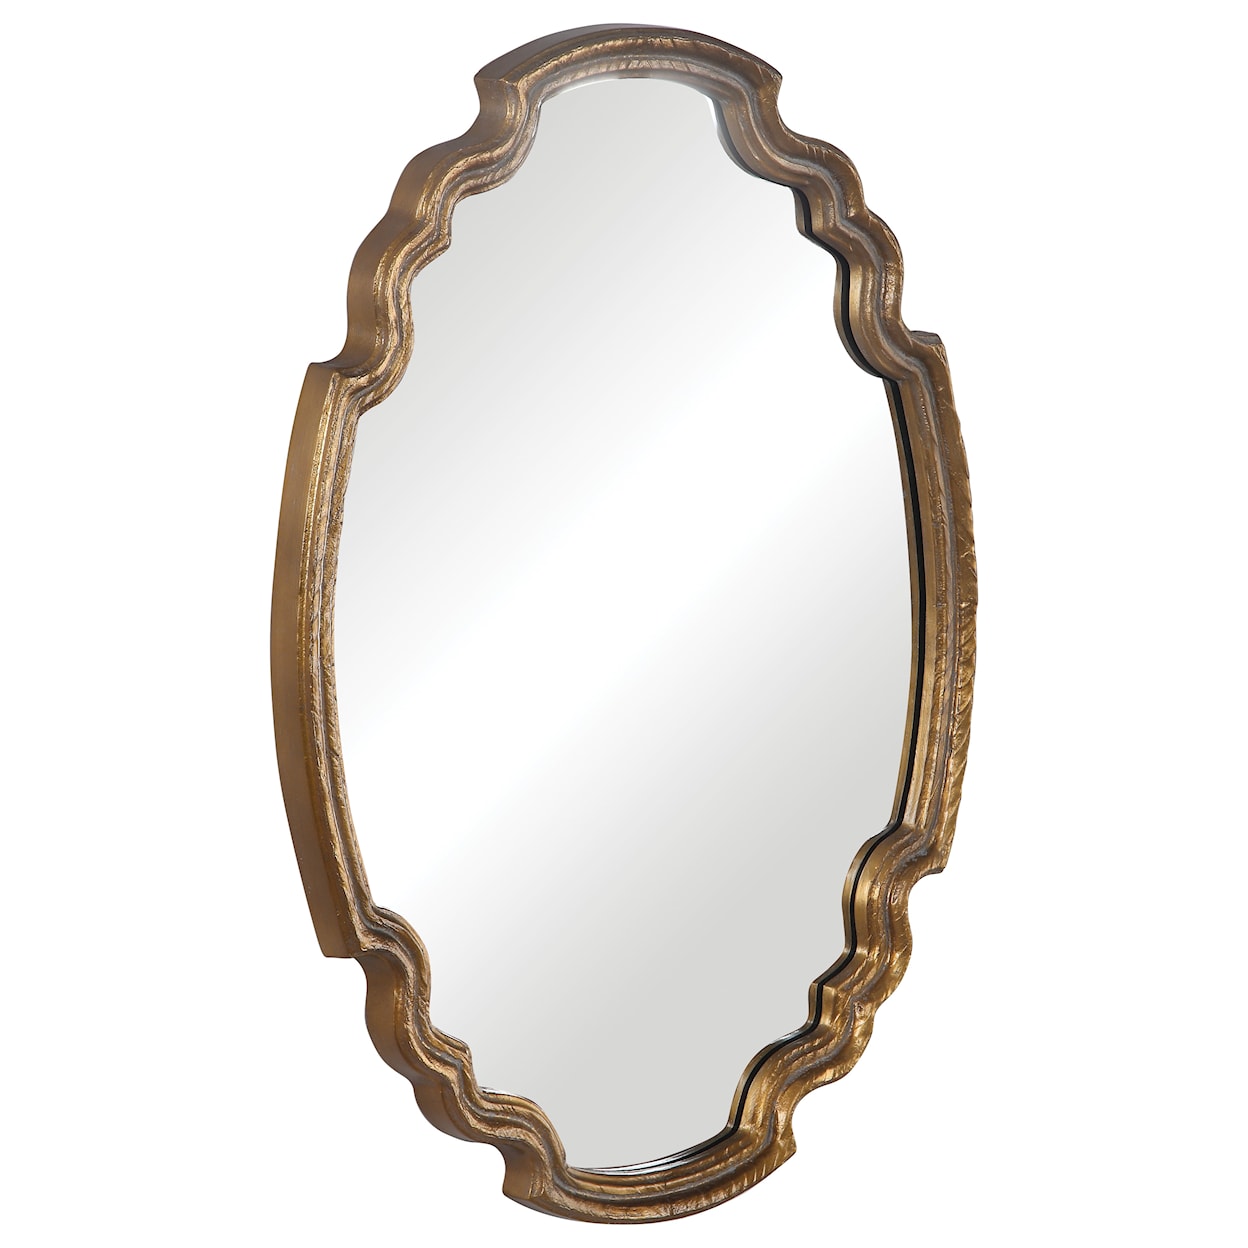 Uttermost Mirrors - Oval Ariane Gold Oval Mirror